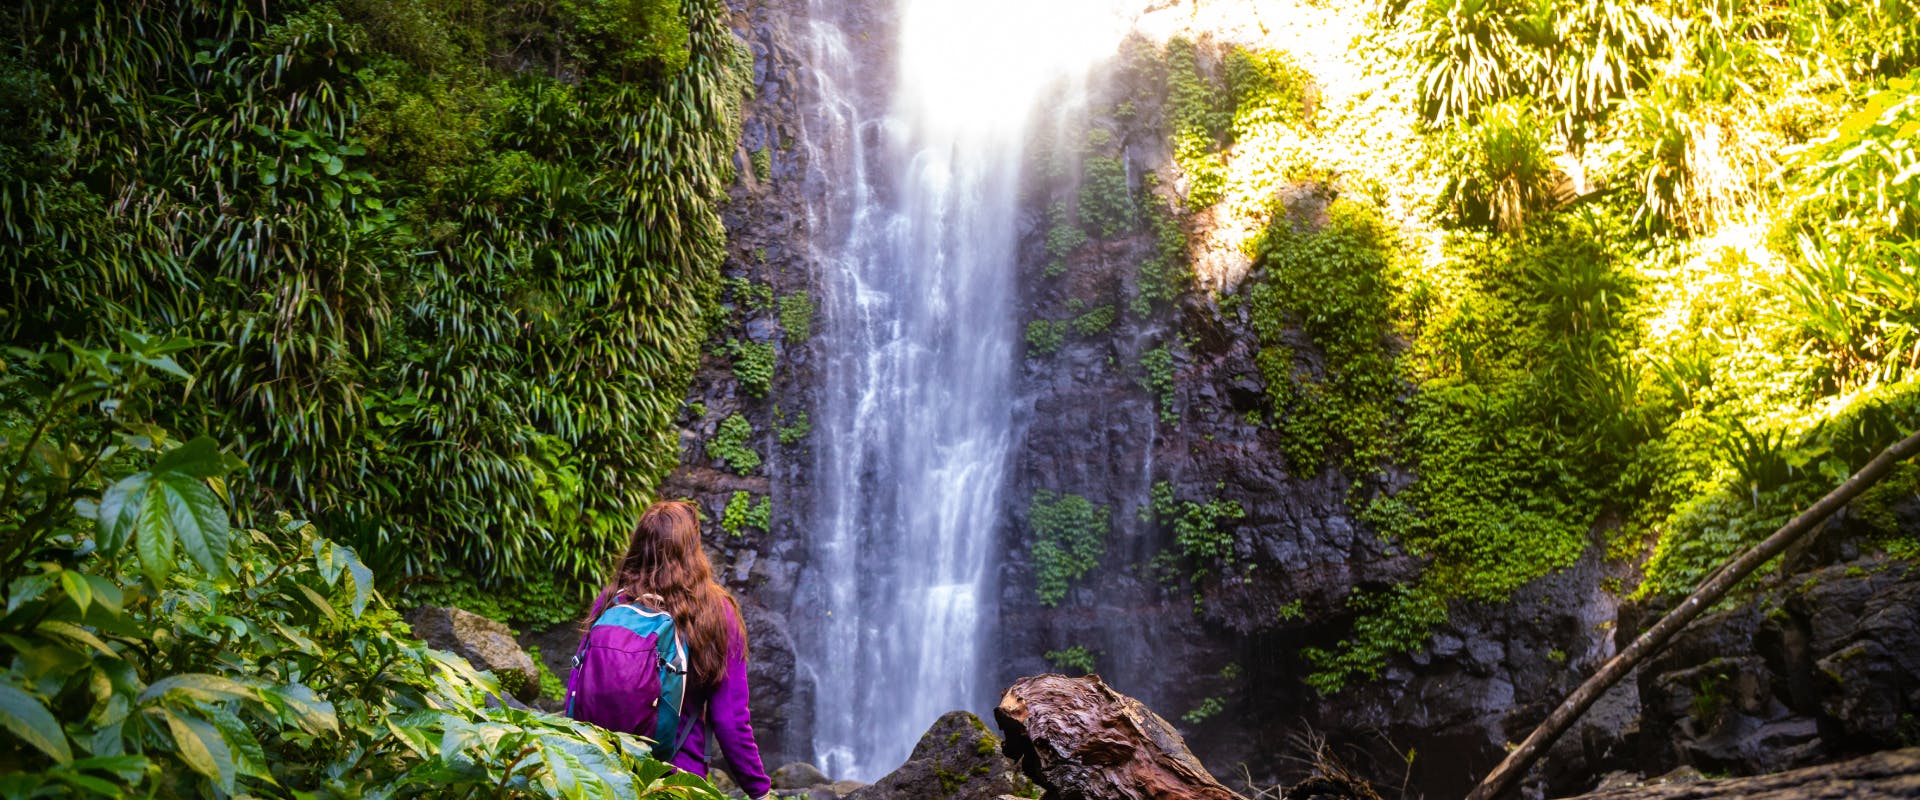 a cascading waterfall in the daintree rainforest in australia being observed by a solo female traveler